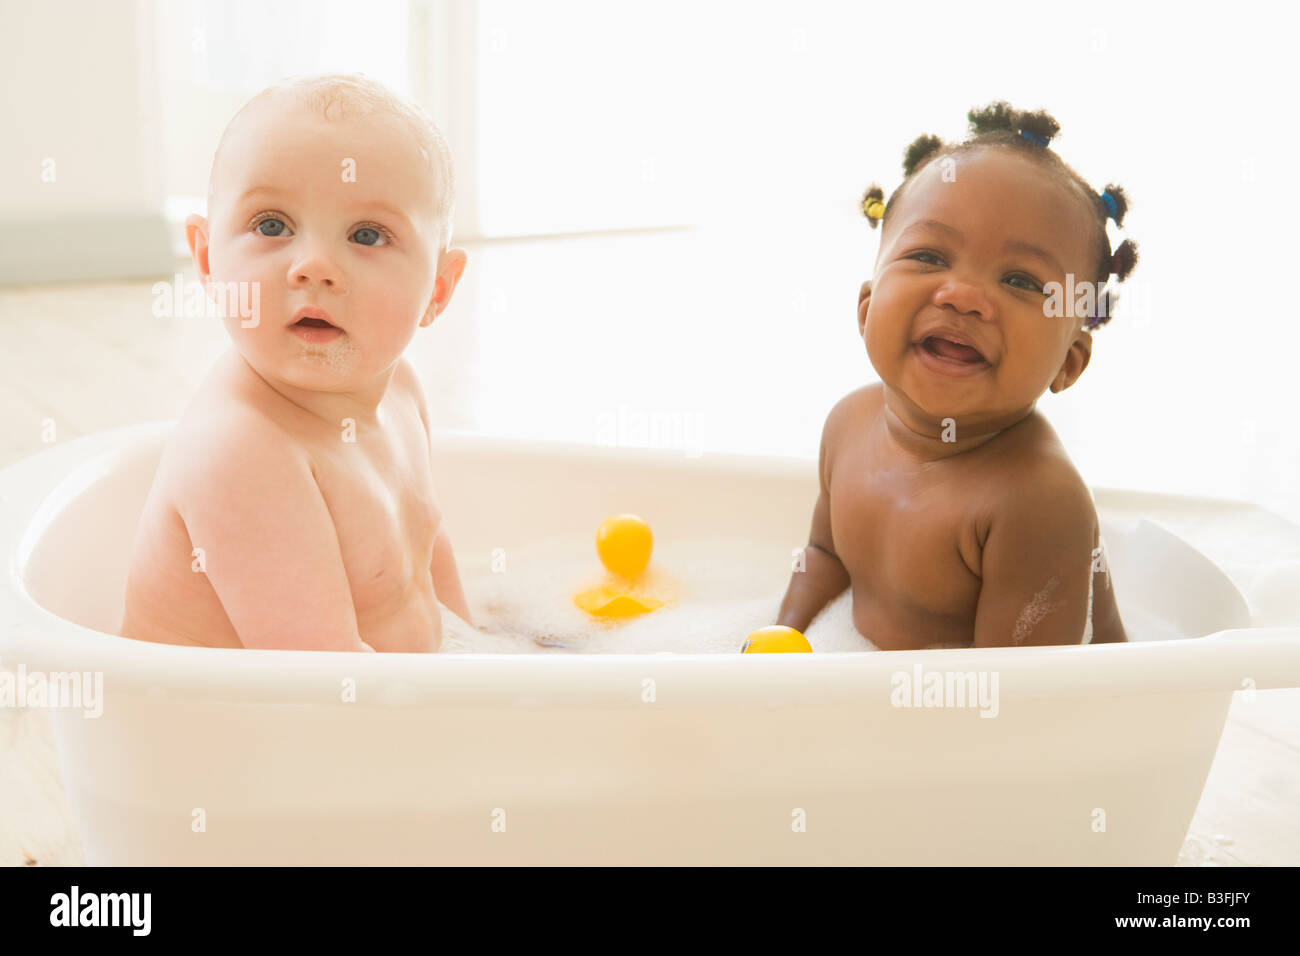 Two babies in bubble bath Stock Photo